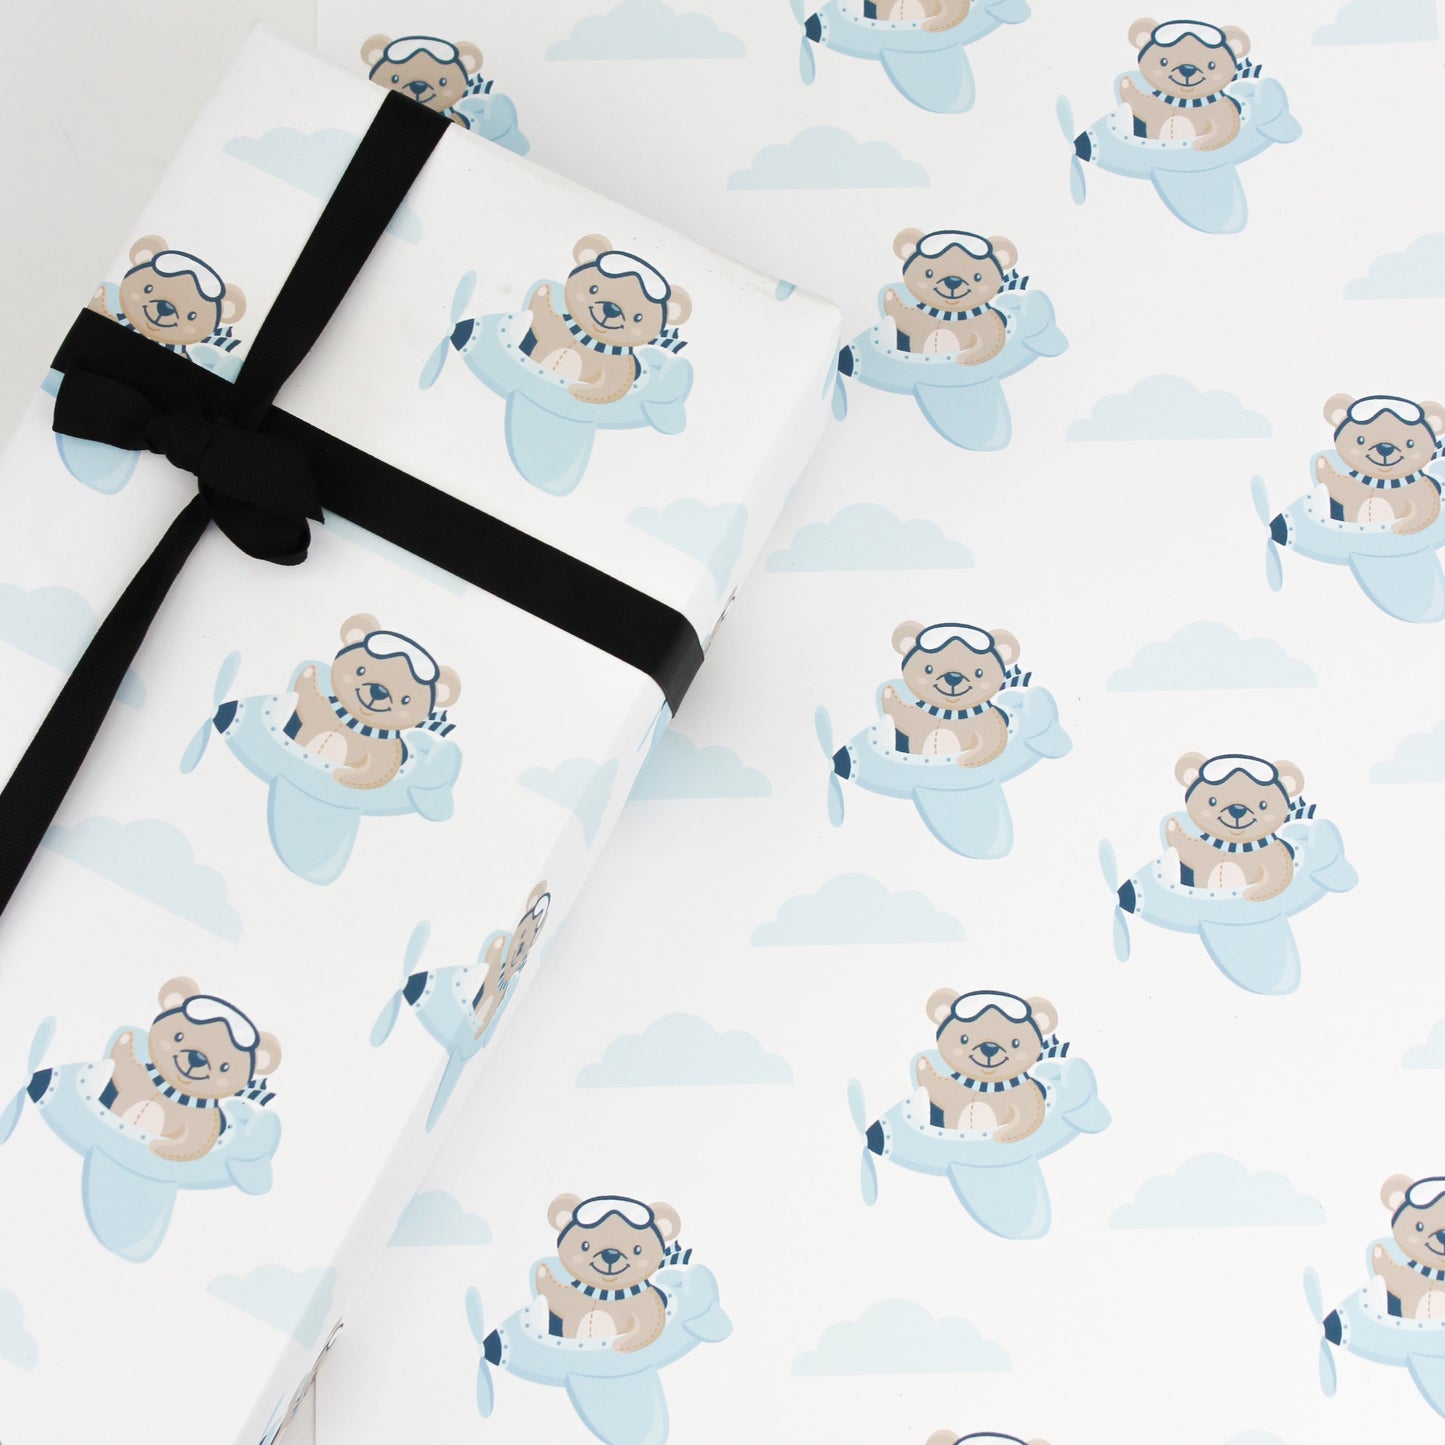 Teddy Bear in Aeroplane, Luxury Gift Wrapping Paper 140 GSM, Superior Quality